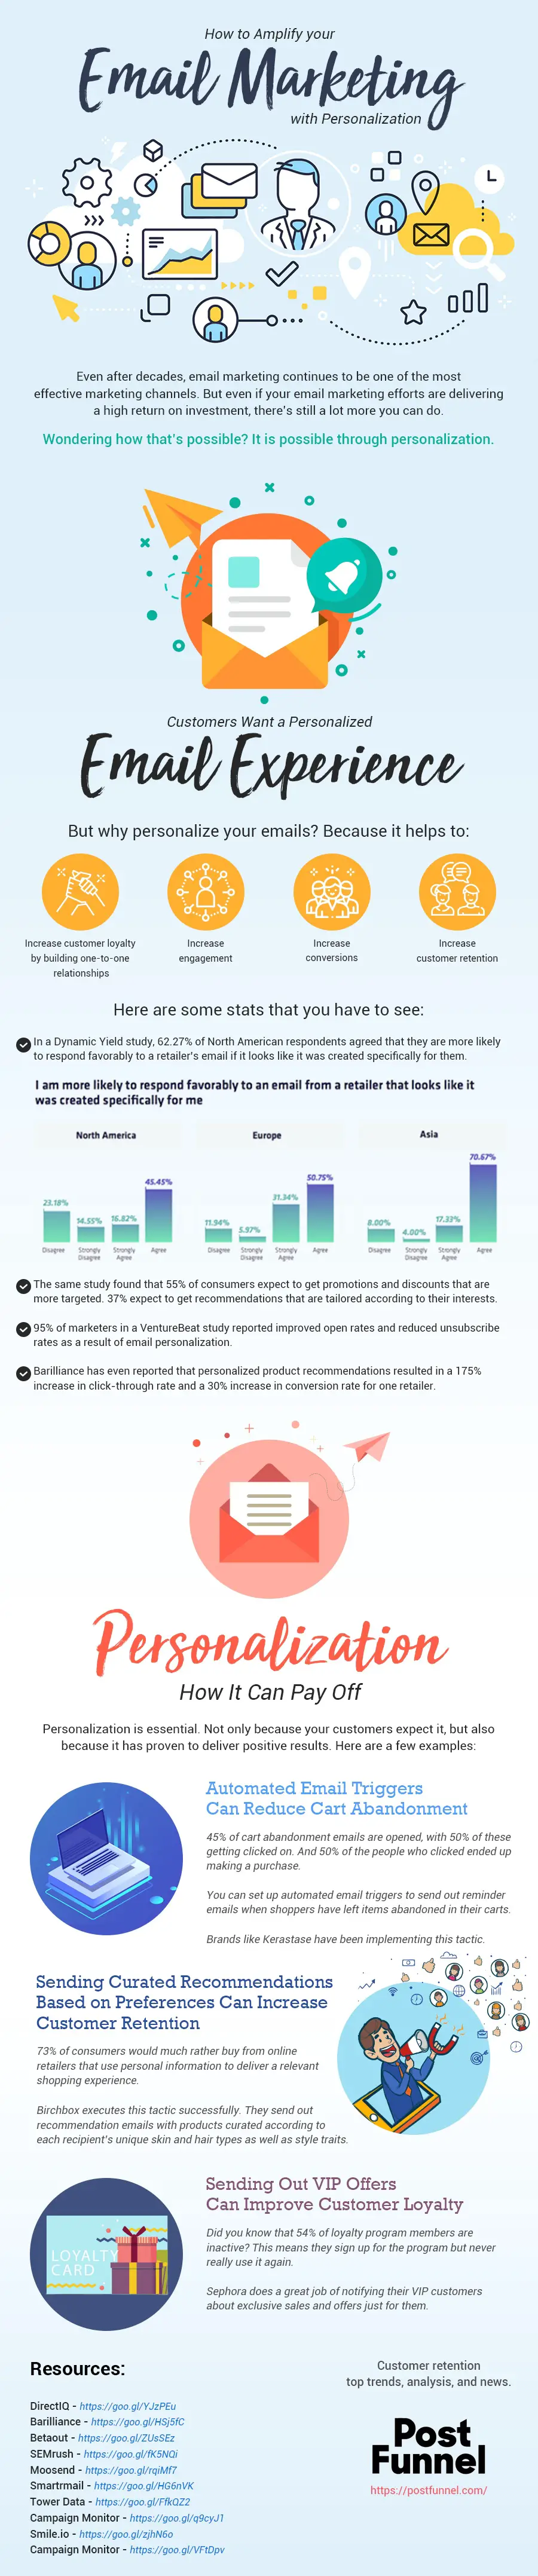 personalization_tactics_to_amplify_your_email_marketing-infographic.jpg